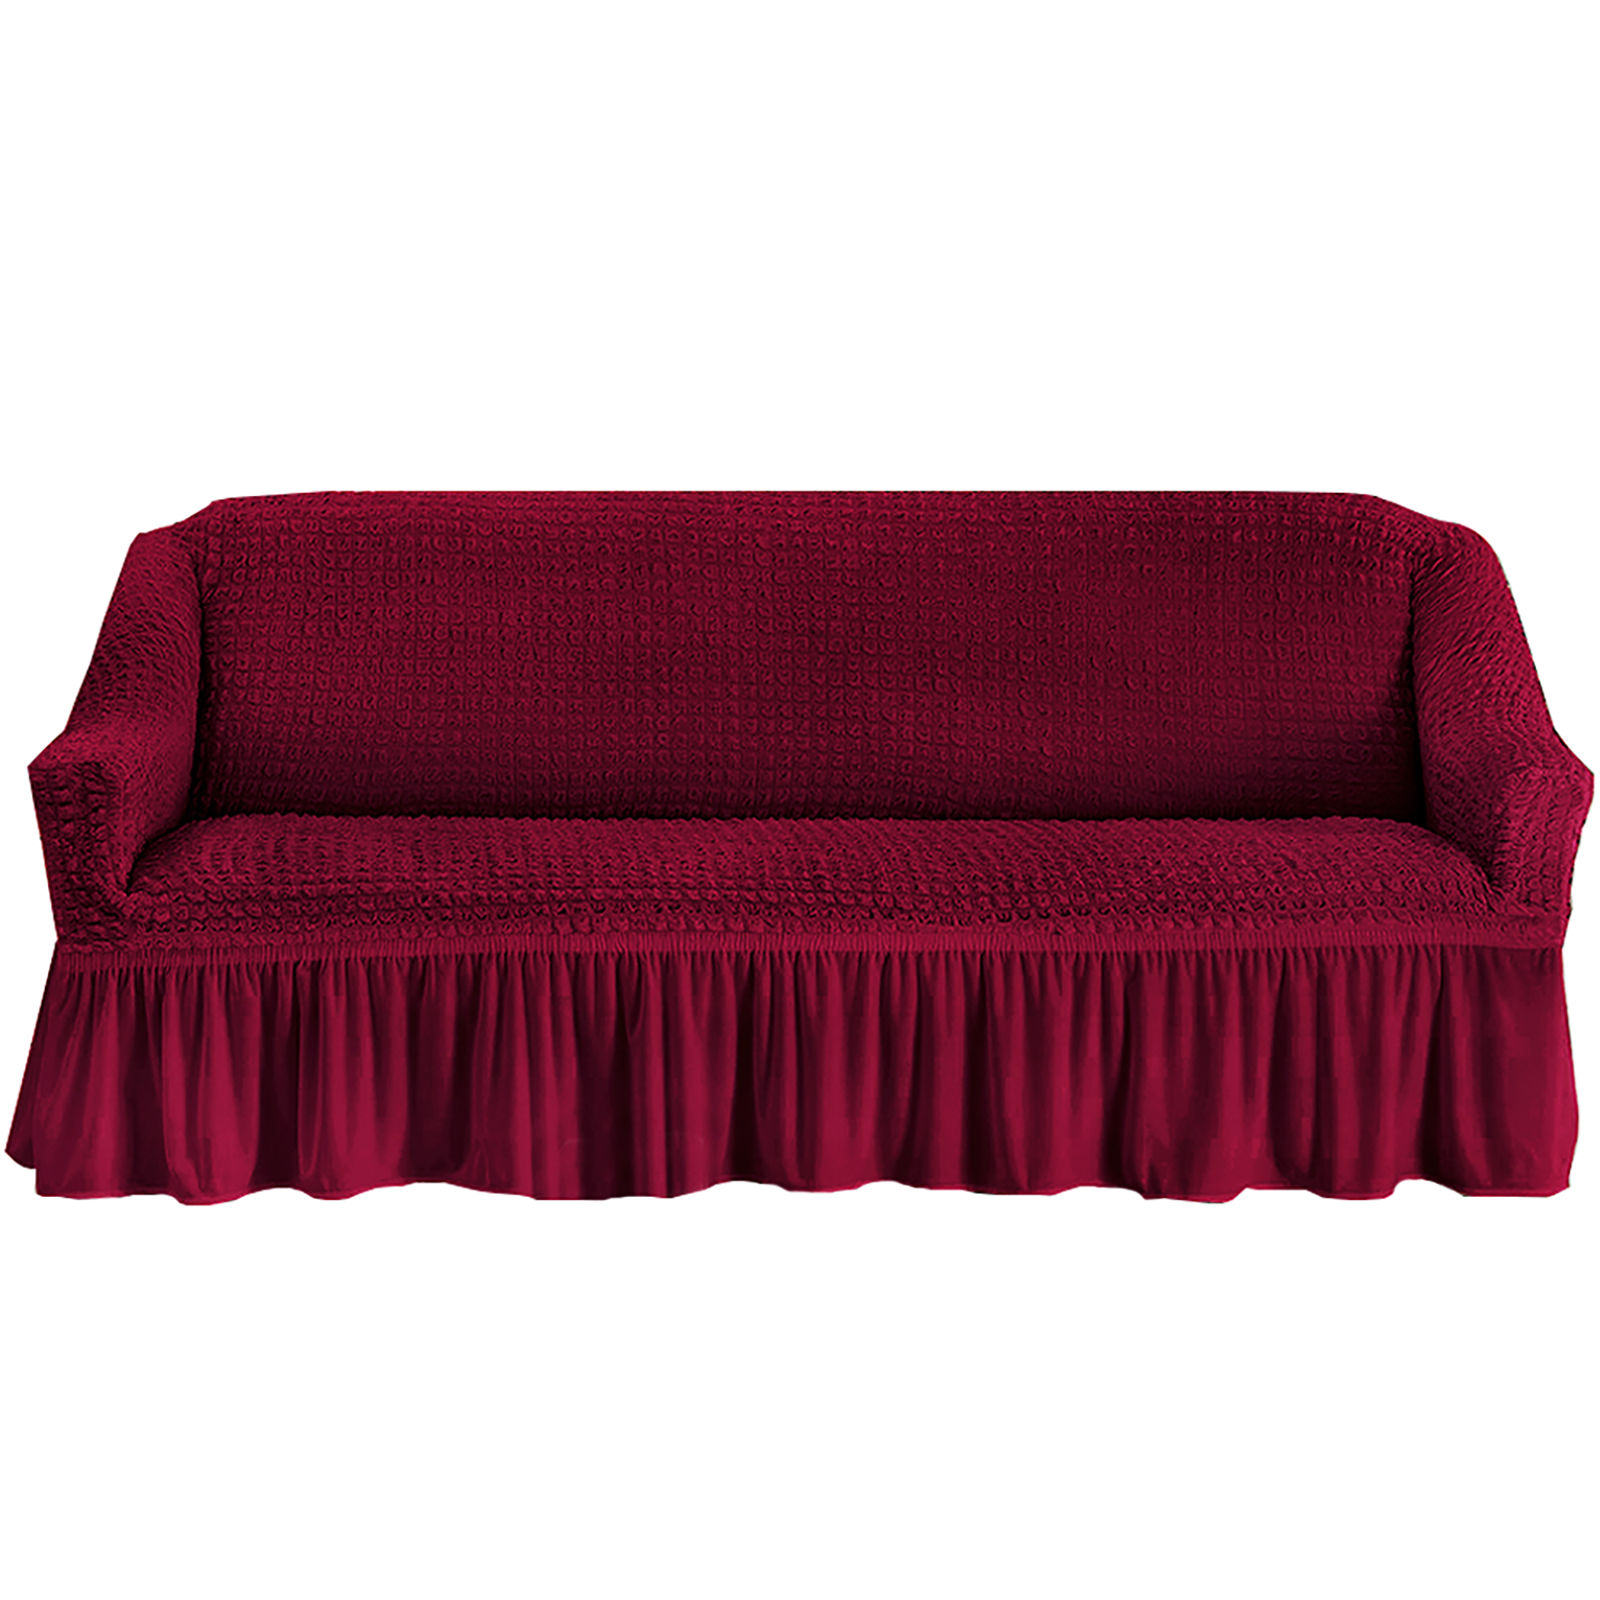 Stretch Sofa Slipcover, 3 Seater Sofa Slipcovers With Skirt With Armless Soft Sofa Cover Elastic Straps Sofa Slipcover For Living Room Kids Pets-red-X-Large